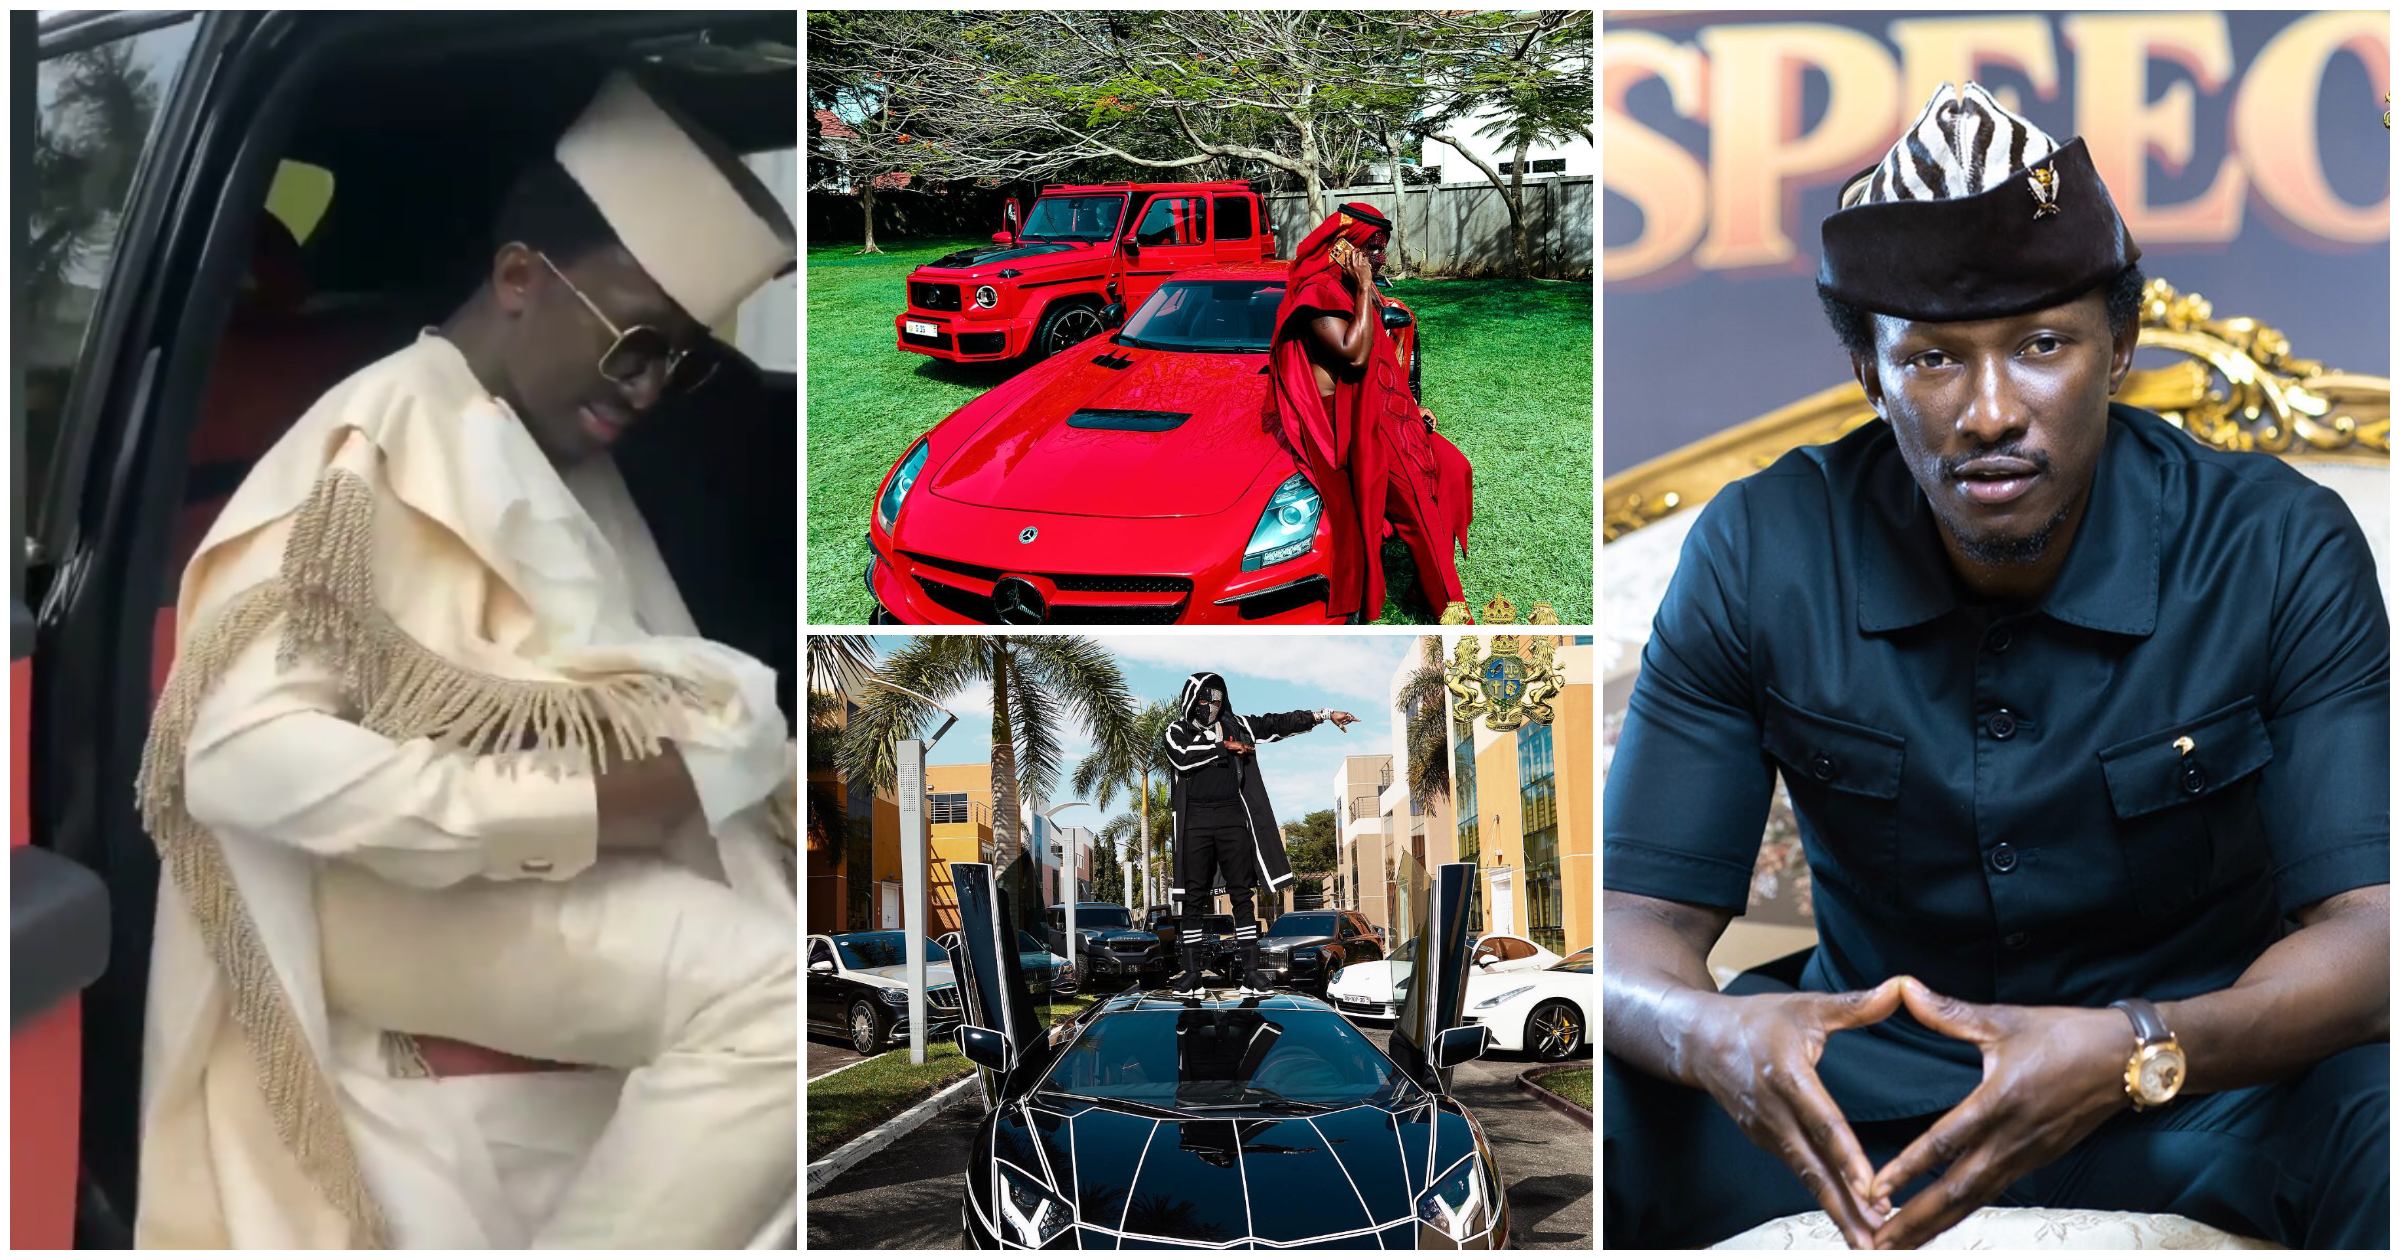 "Ain't got nowhere to drive them": Cheddar brags as he lists his Lamborghini, Ferrari, Maybach, Rolls Royce in new video